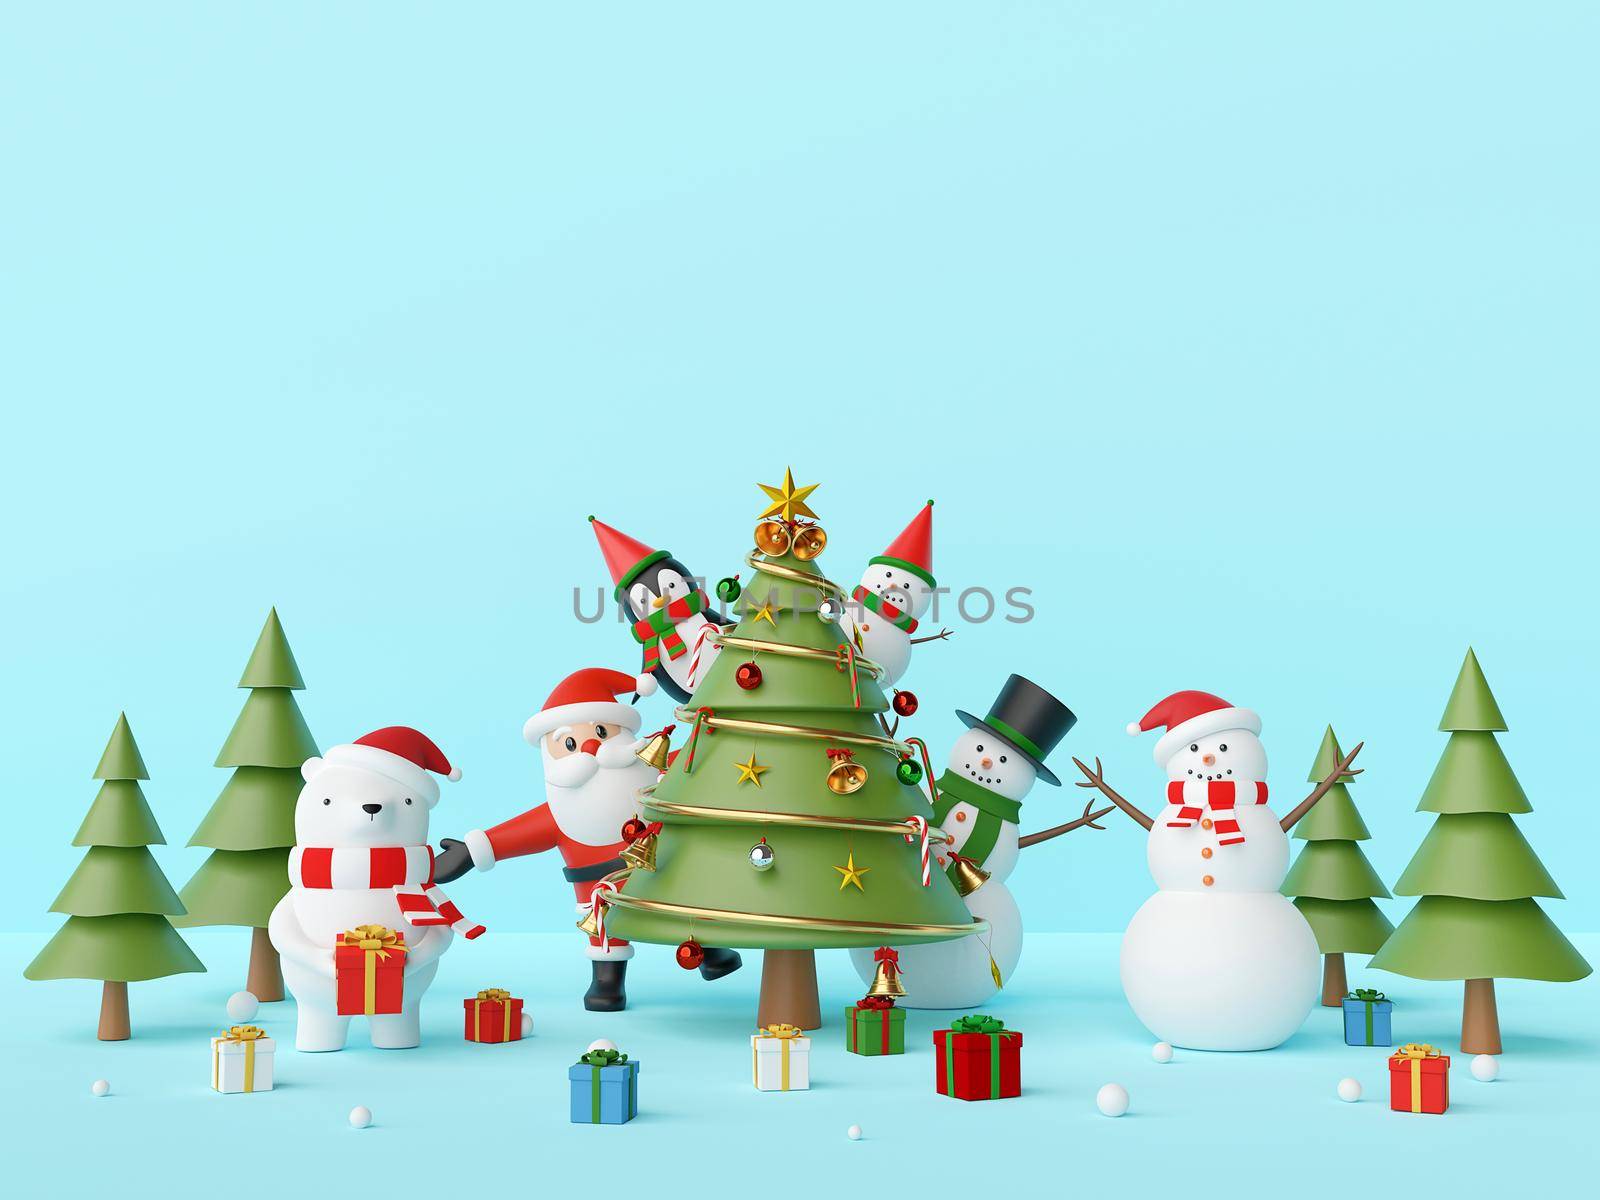 Merry Christmas and Happy New Year, Christmas party Santa Claus and friend with Christmas tree on a blue background, 3d rendering